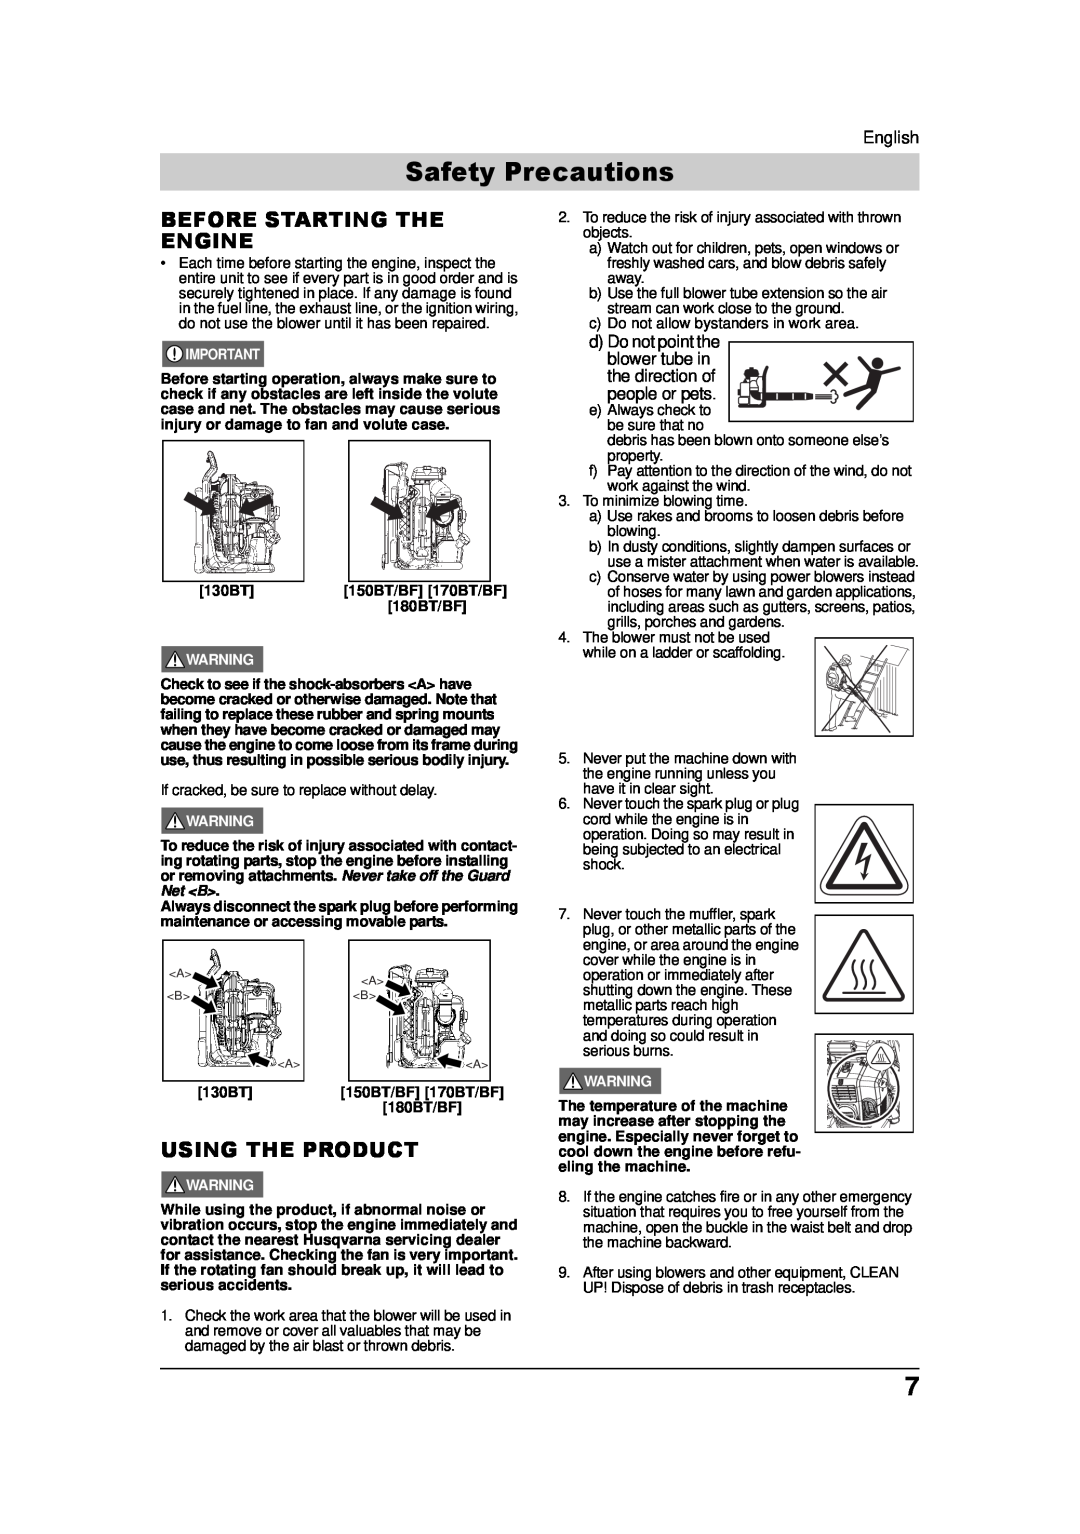 Husqvarna 115 09 83-95, 150BF, 180BF manual Safety Precautions, Before Starting The Engine, Using The Product 